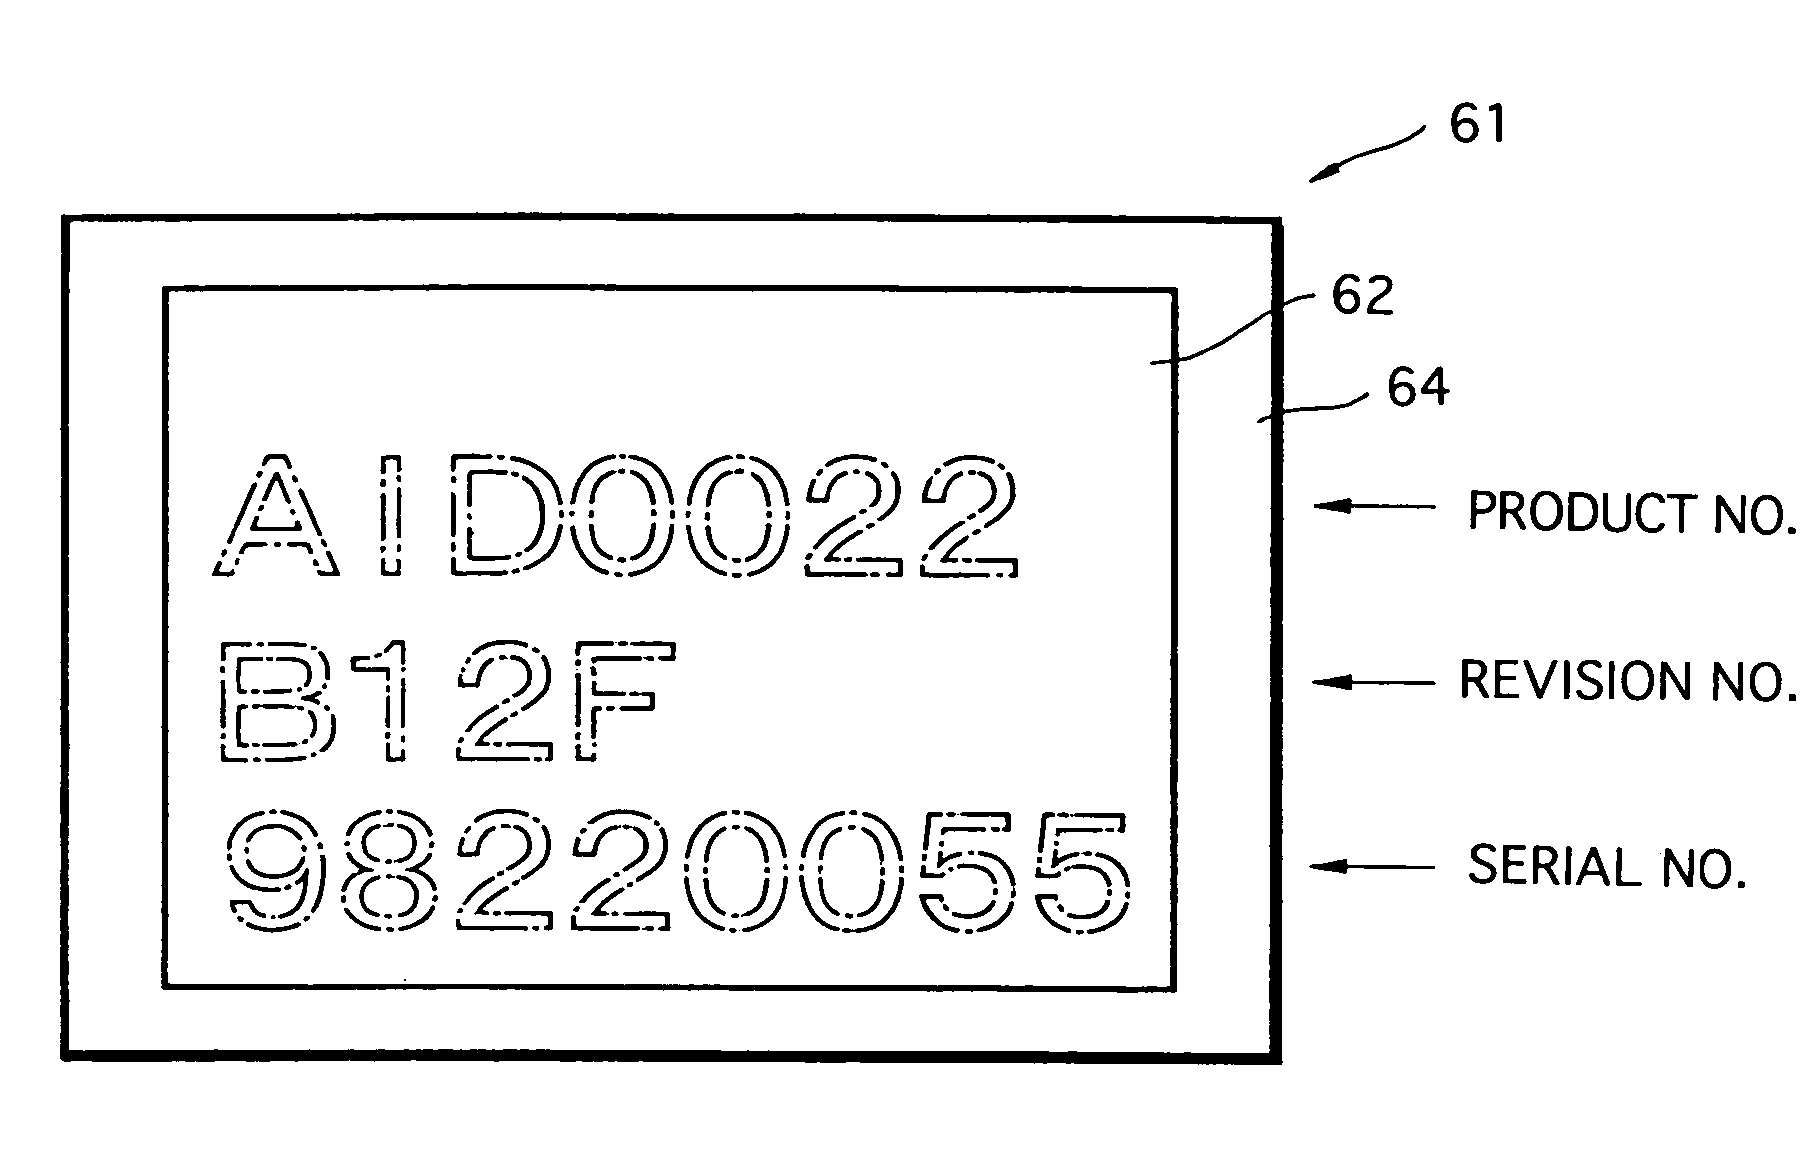 System and method for recording management data for management of solid-state electronic image sensing device, and system and method for sensing management data